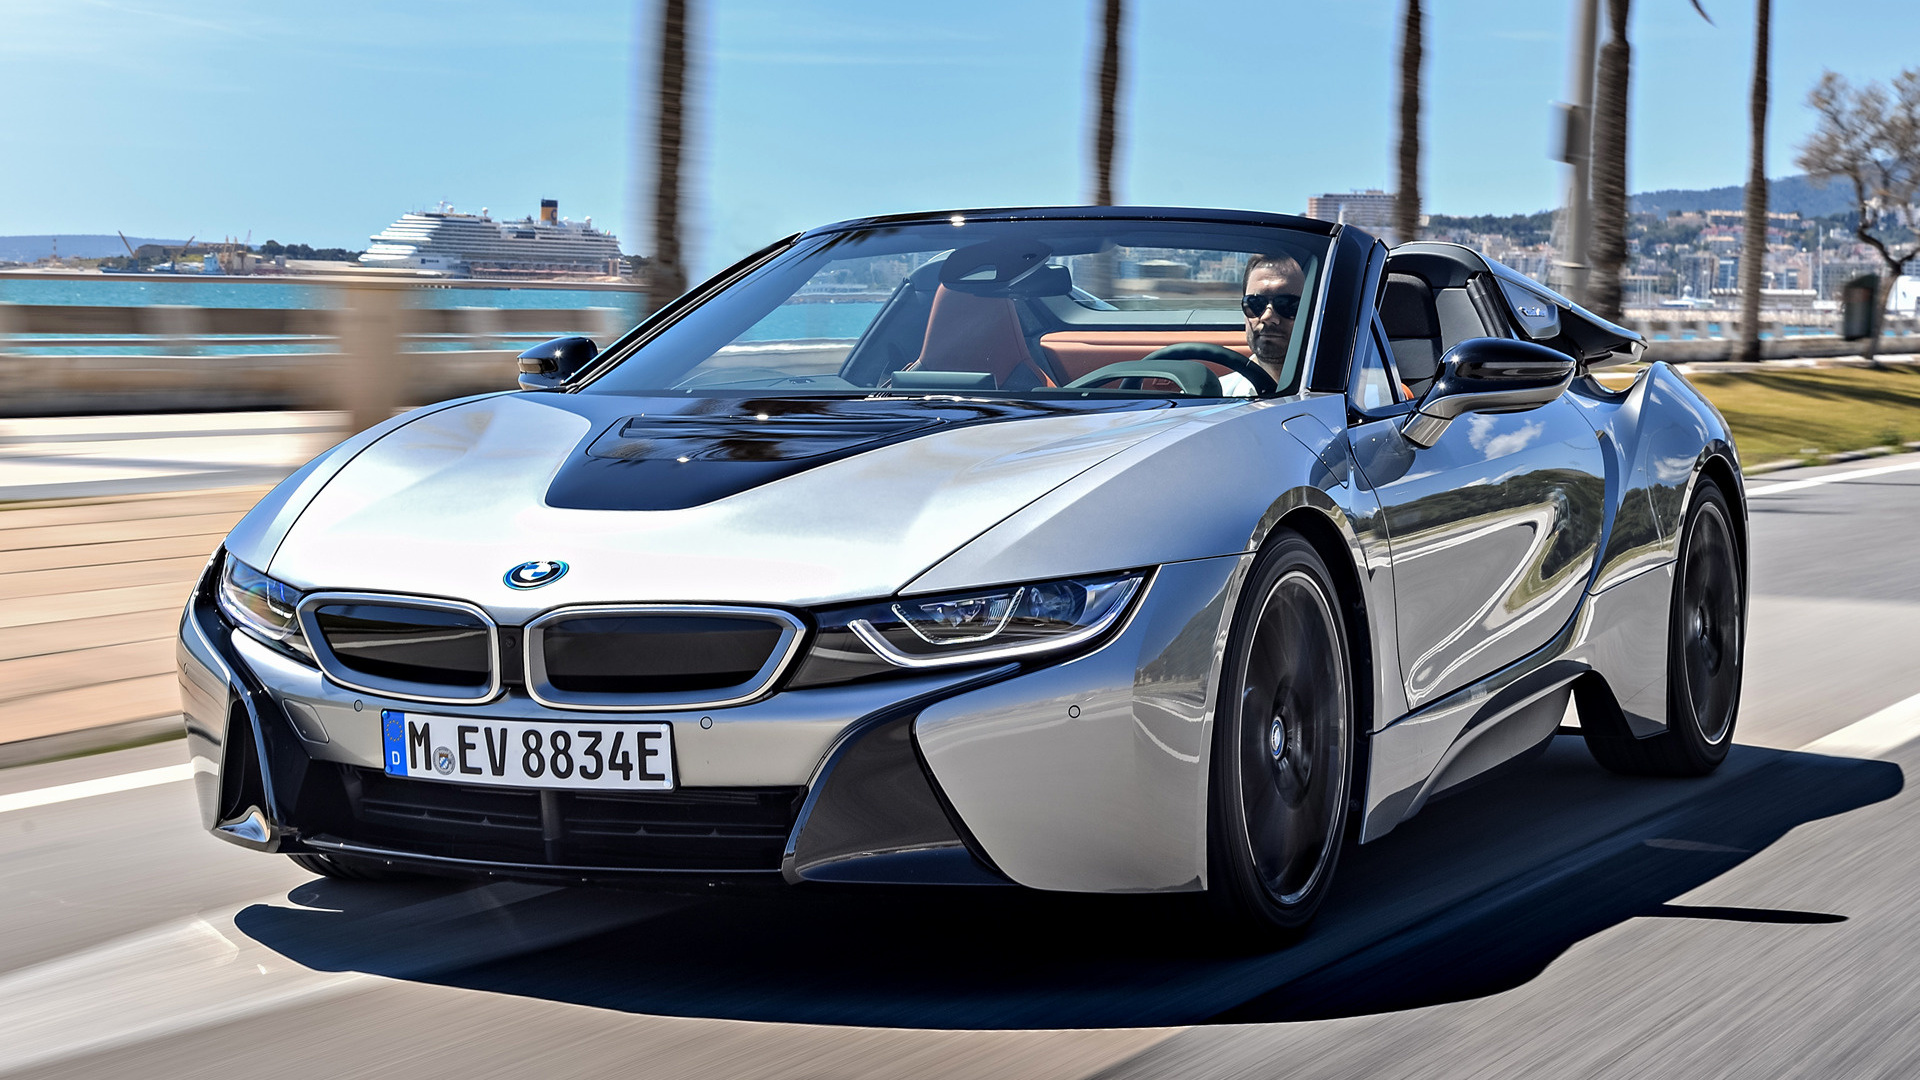 consumptie Over instelling Weven 2018 BMW i8 Roadster - Wallpapers and HD Images | Car Pixel